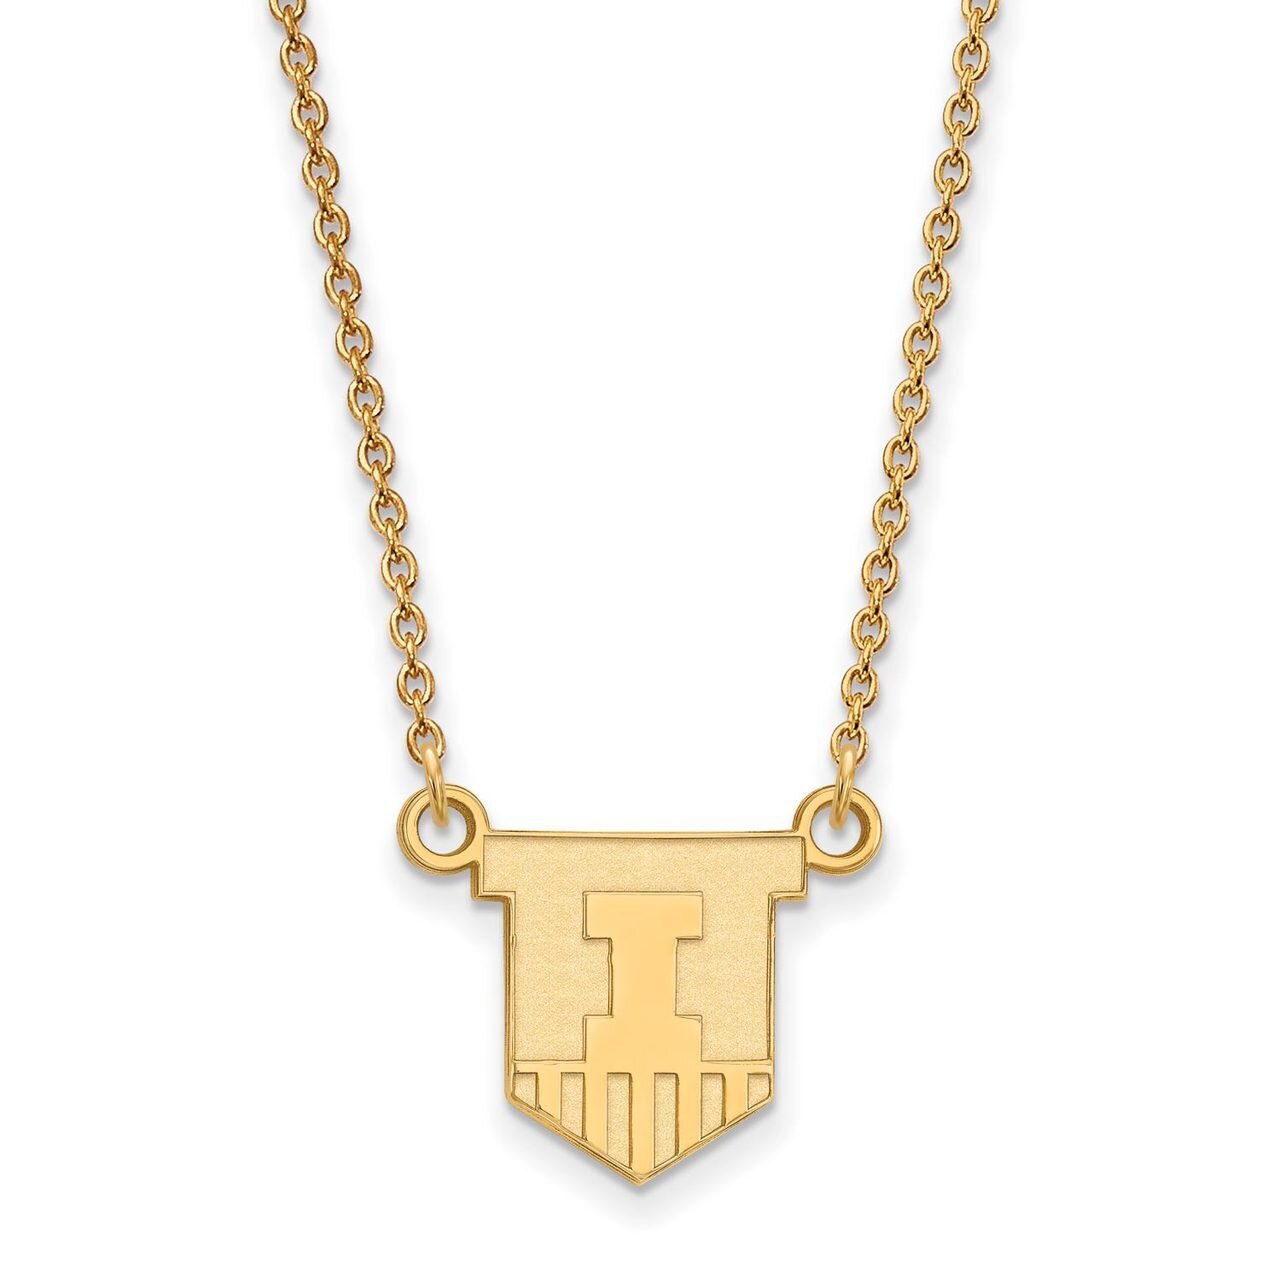 University of Illinois Small Pendant with Chain Necklace 14k Yellow Gold 4Y054UIL-18